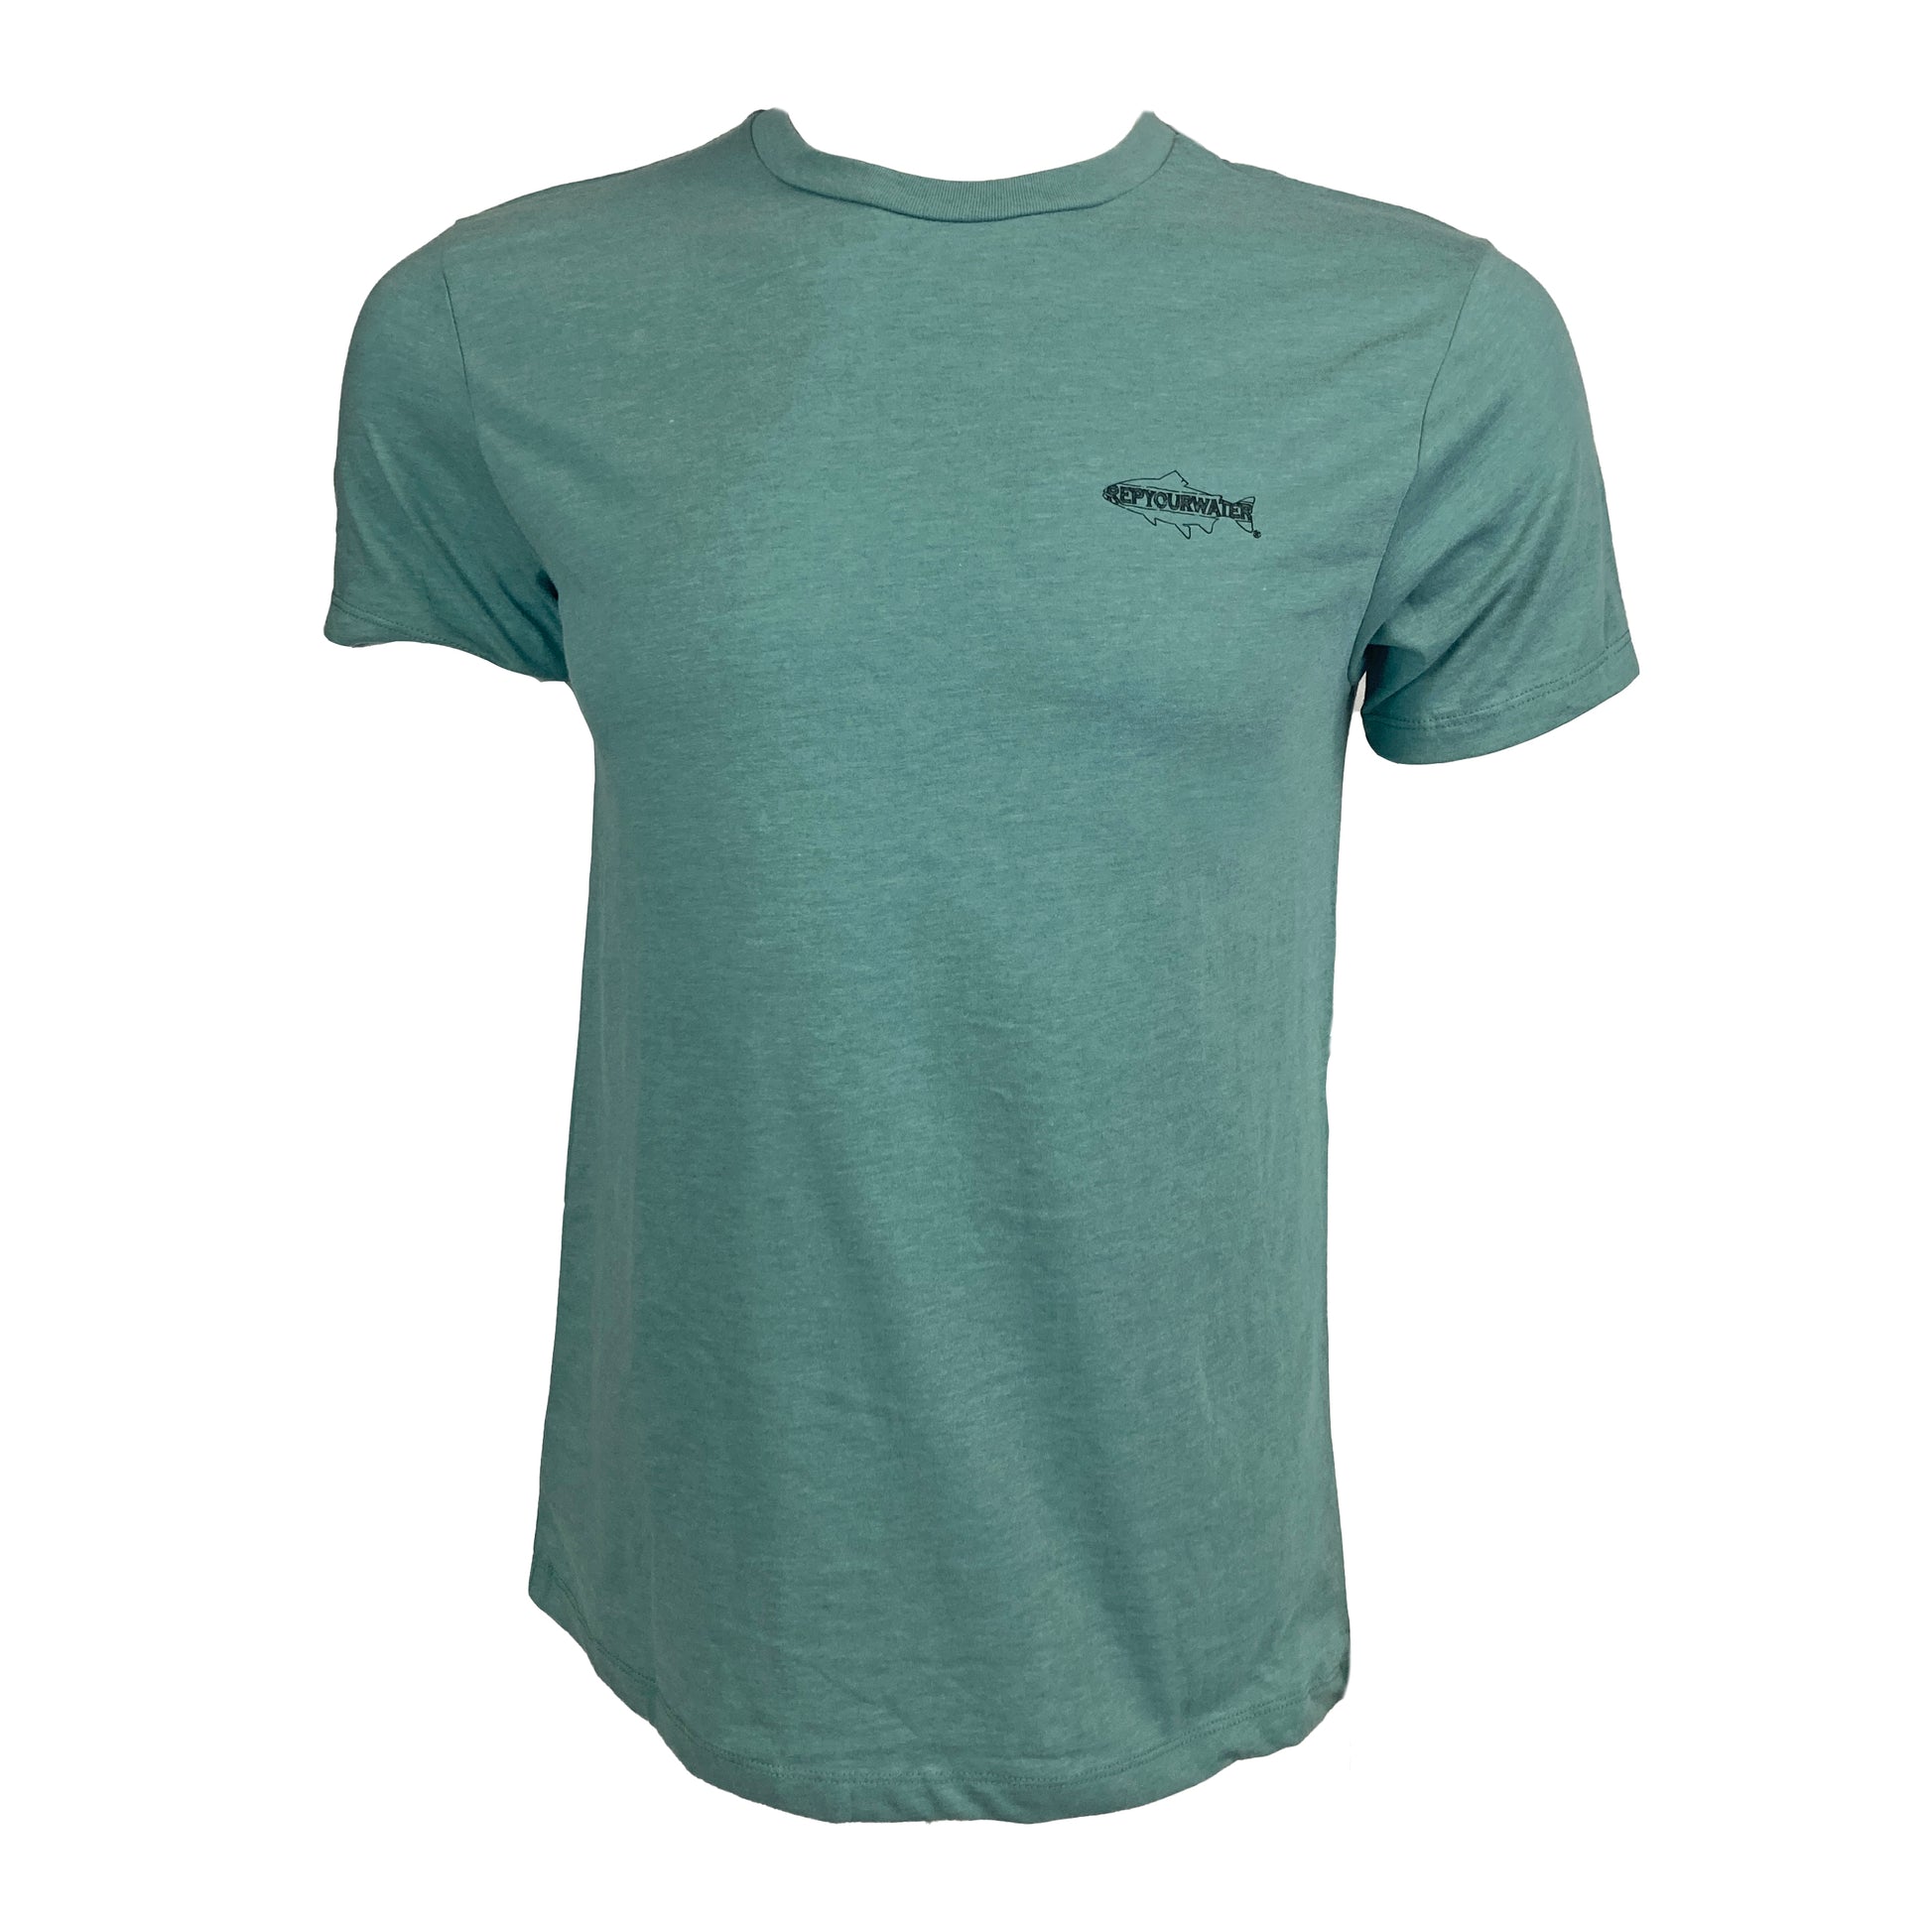 Blue green tee shown from the front with Rep Your Water logo on wearer's left chest.